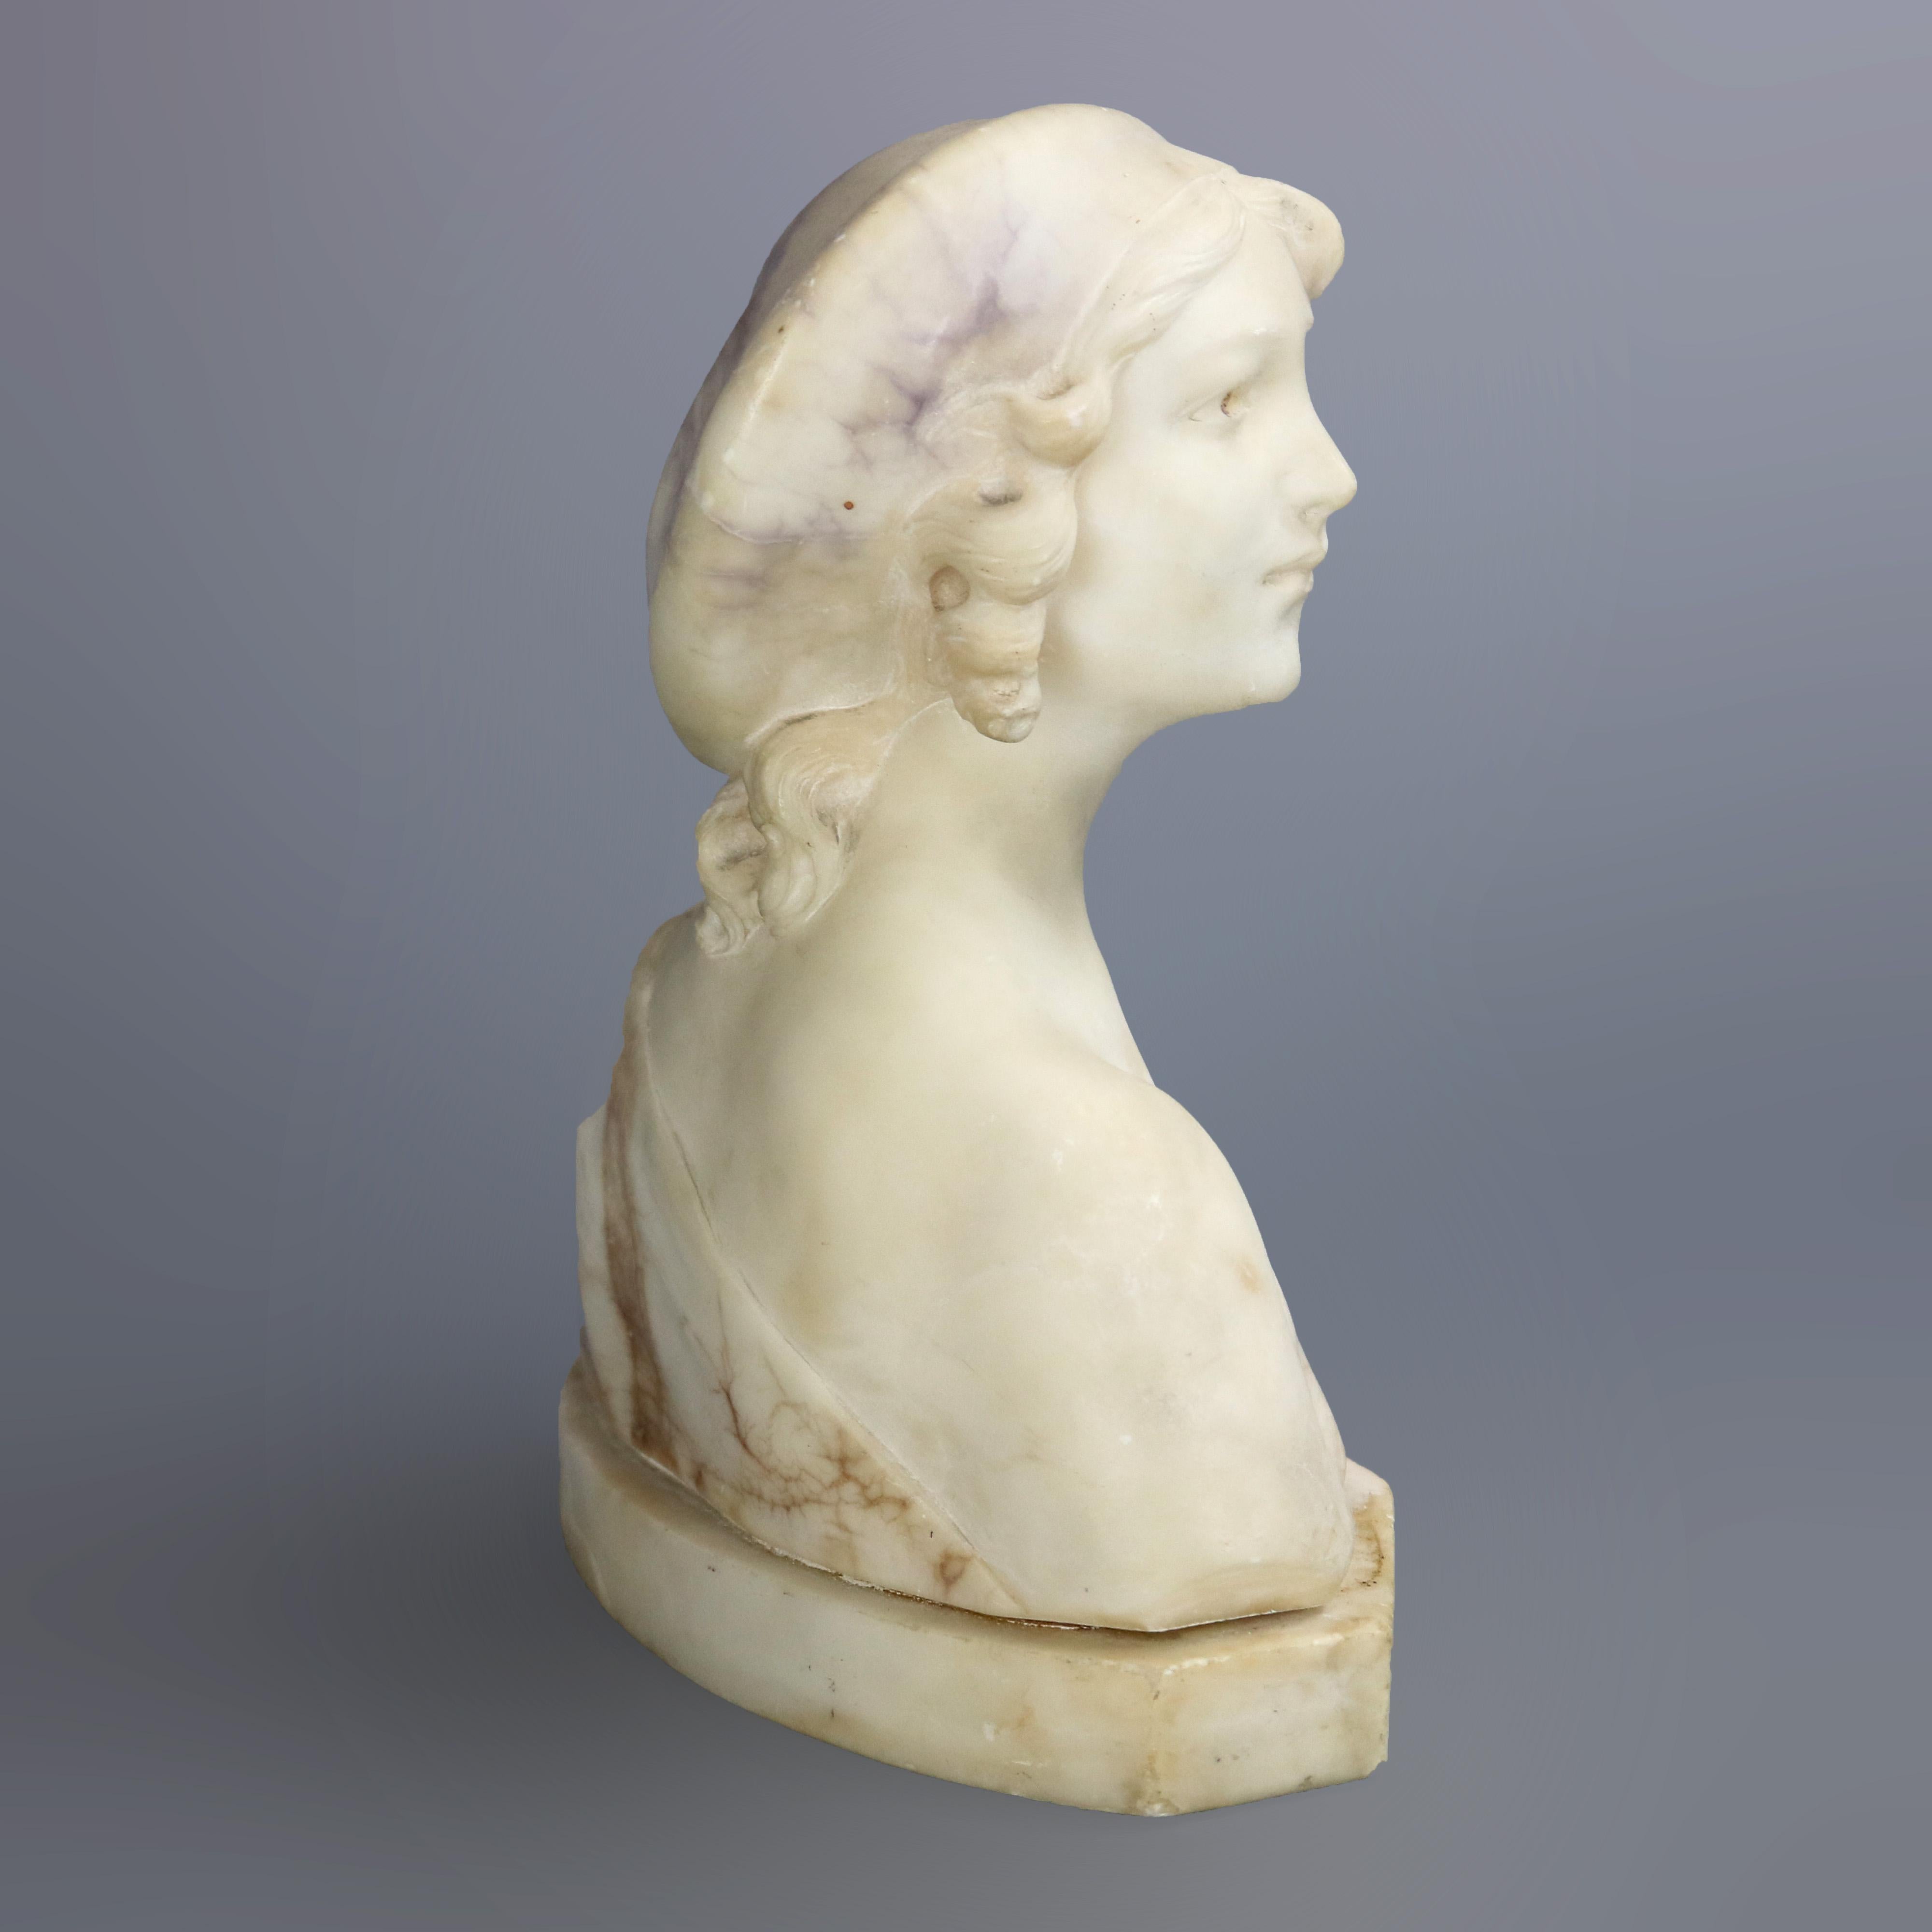 Hand-Carved Antique Italian 2 Tone Marble Joan of Arc Portrait Bust Sculpture, circa 1890